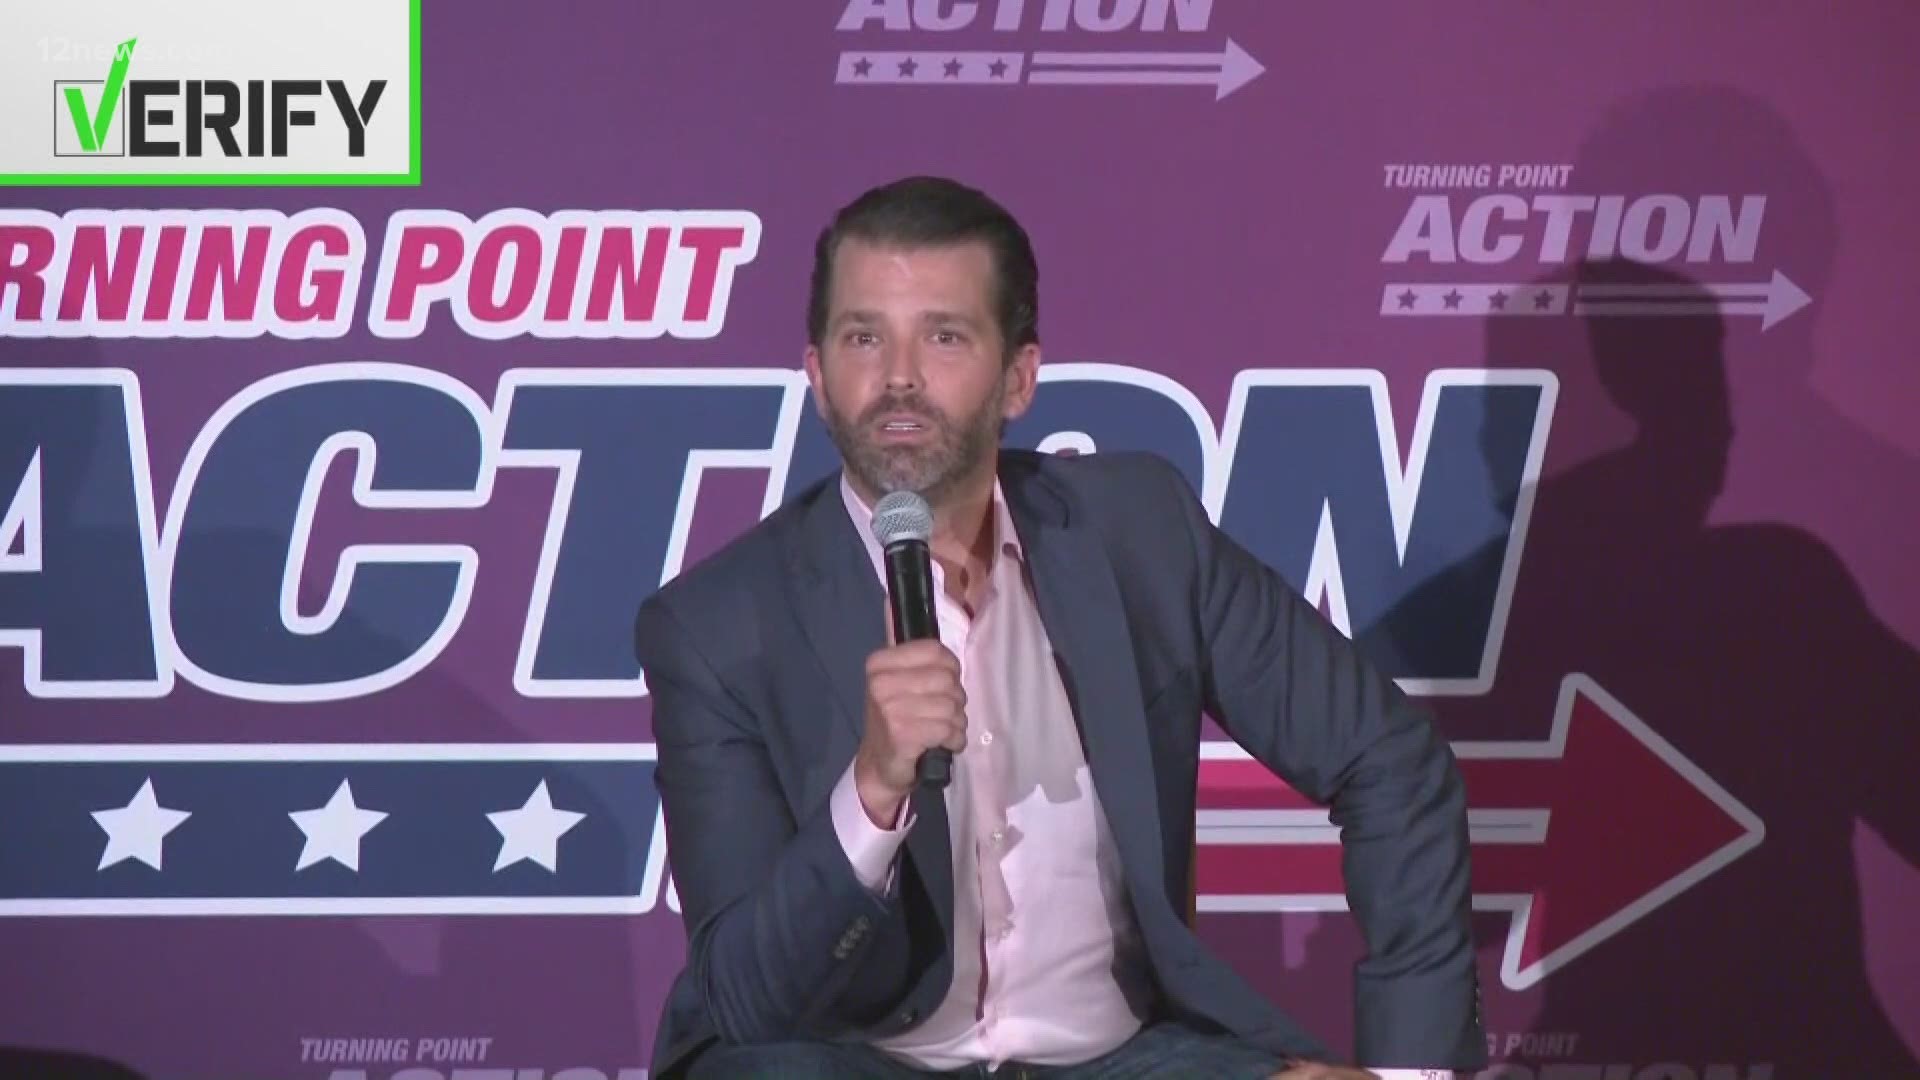 Don Jr. and his two co-hosts made claims about a new California law regarding punishment for sex offenders. They warned the law could come to Arizona.